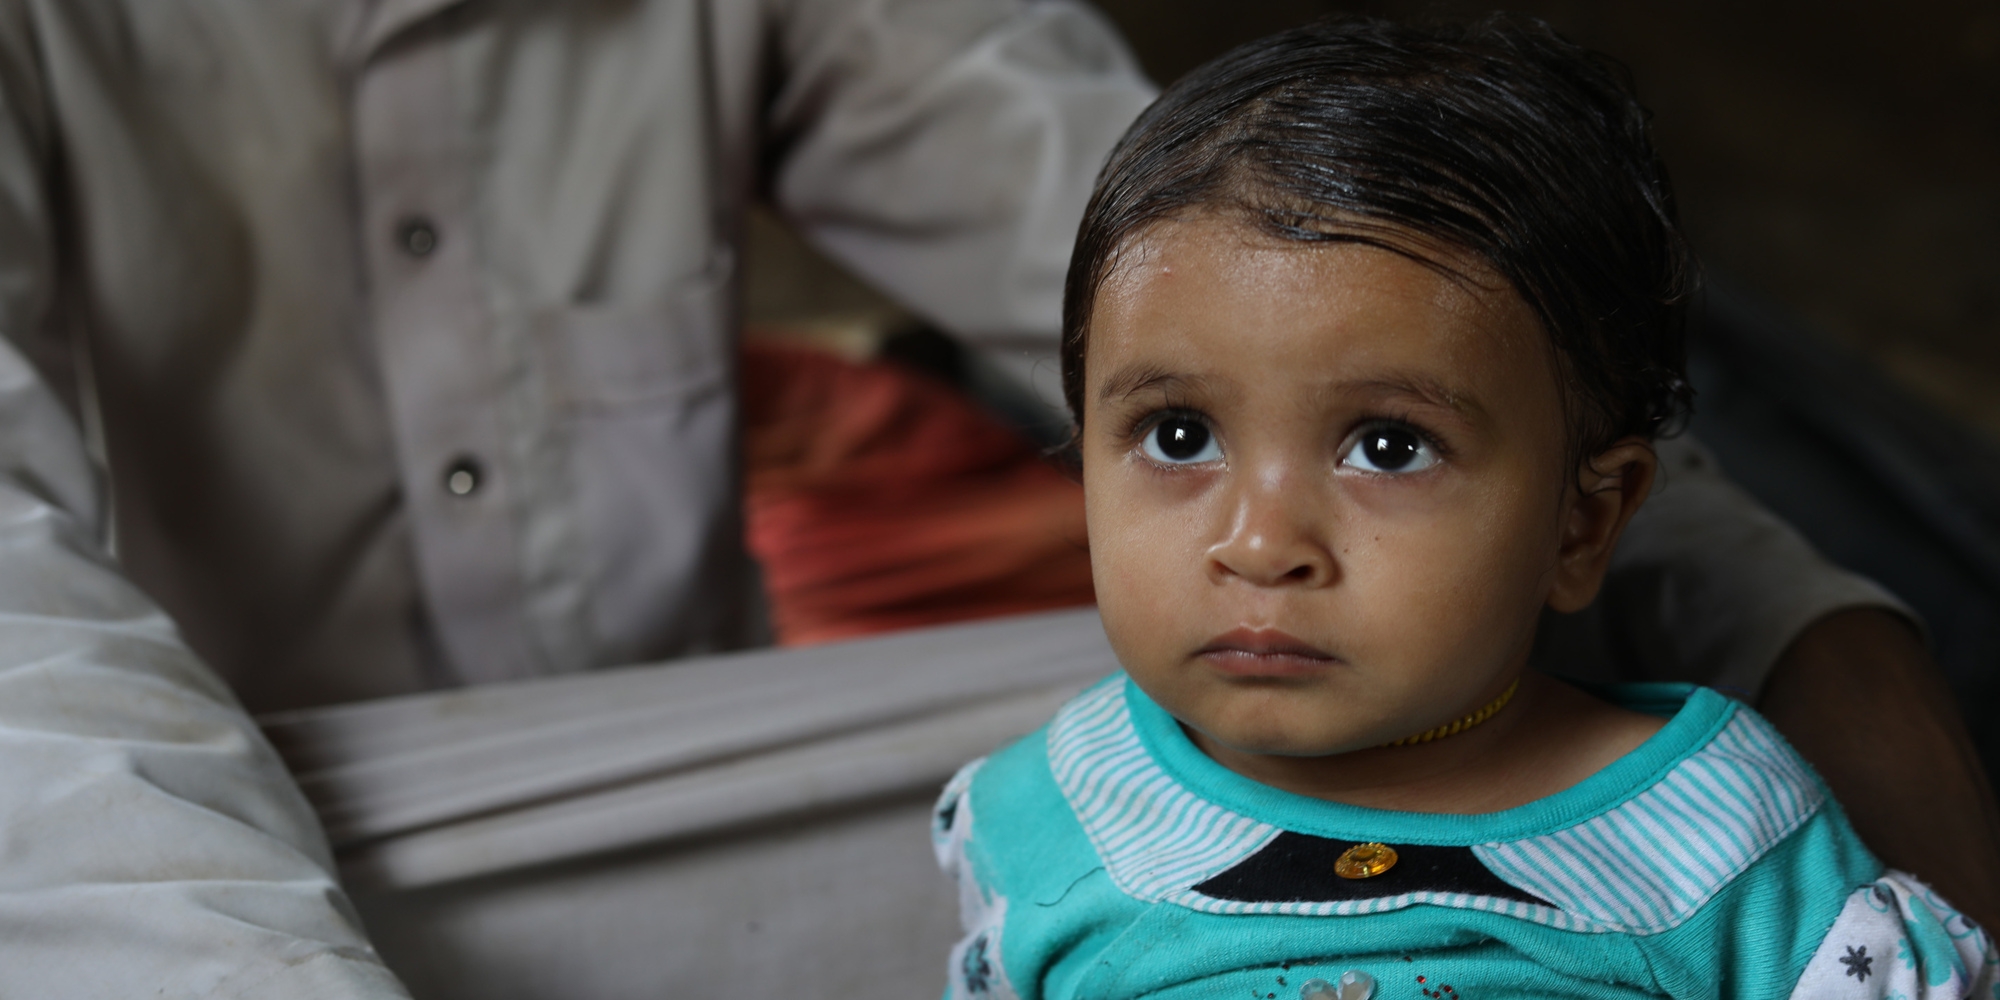 Hanan*, 1 years old, was treated for malnutrition in Yemen. When Hanan* became malnourished, in October 2019, they brought her on the long walk to the health center supported by Save the Children.